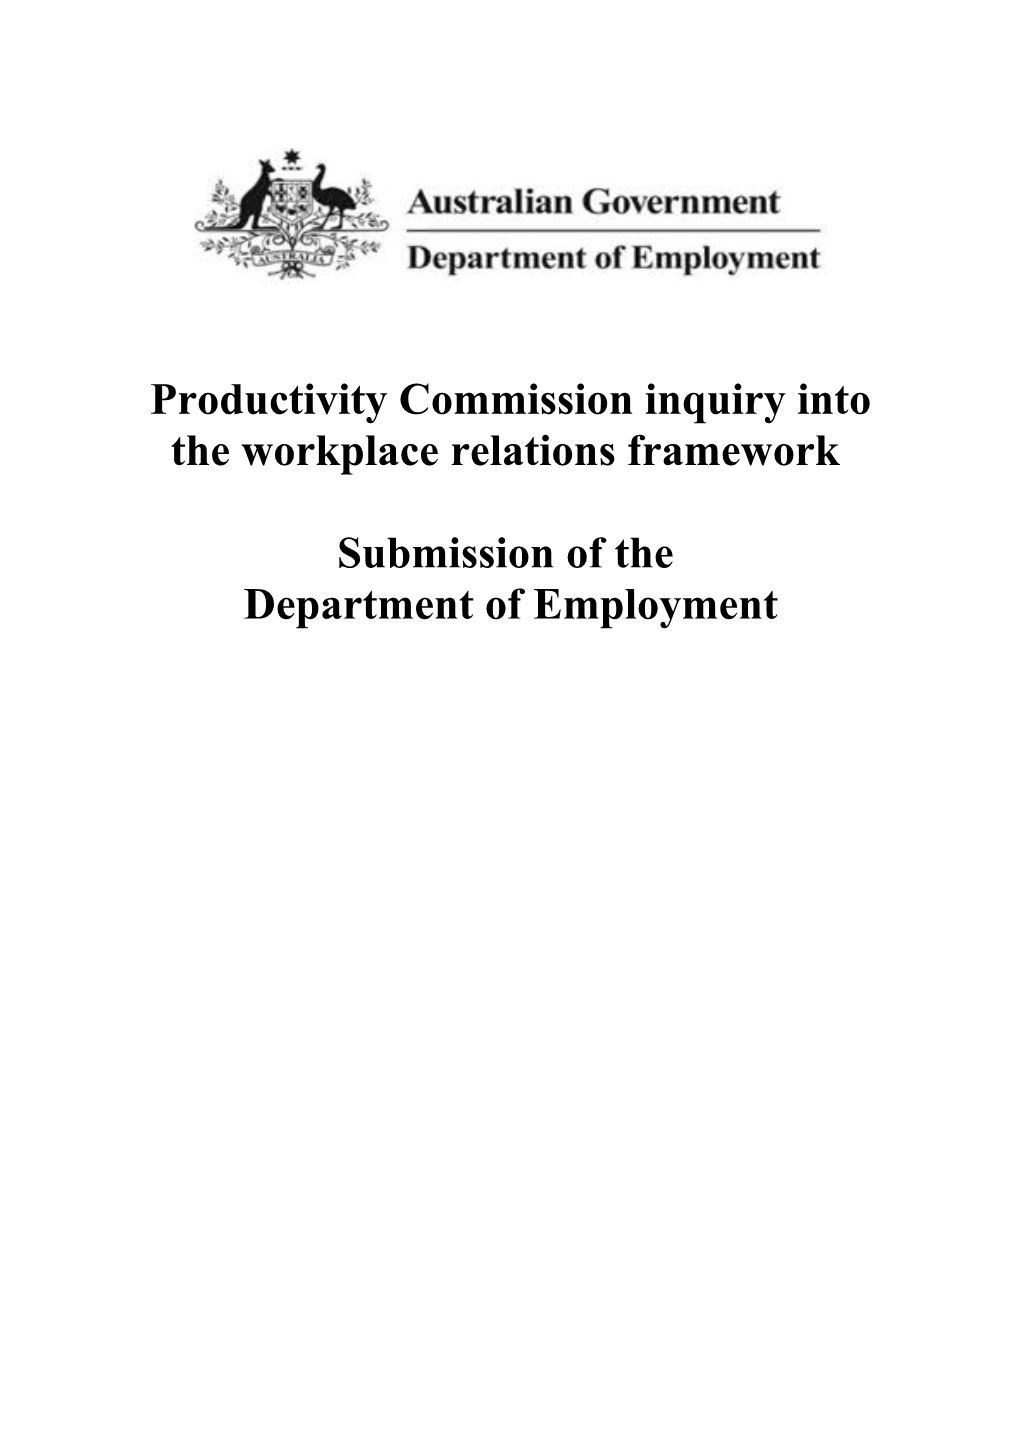 Productivity Commission Inquiry Into the Workplace Relations Framework